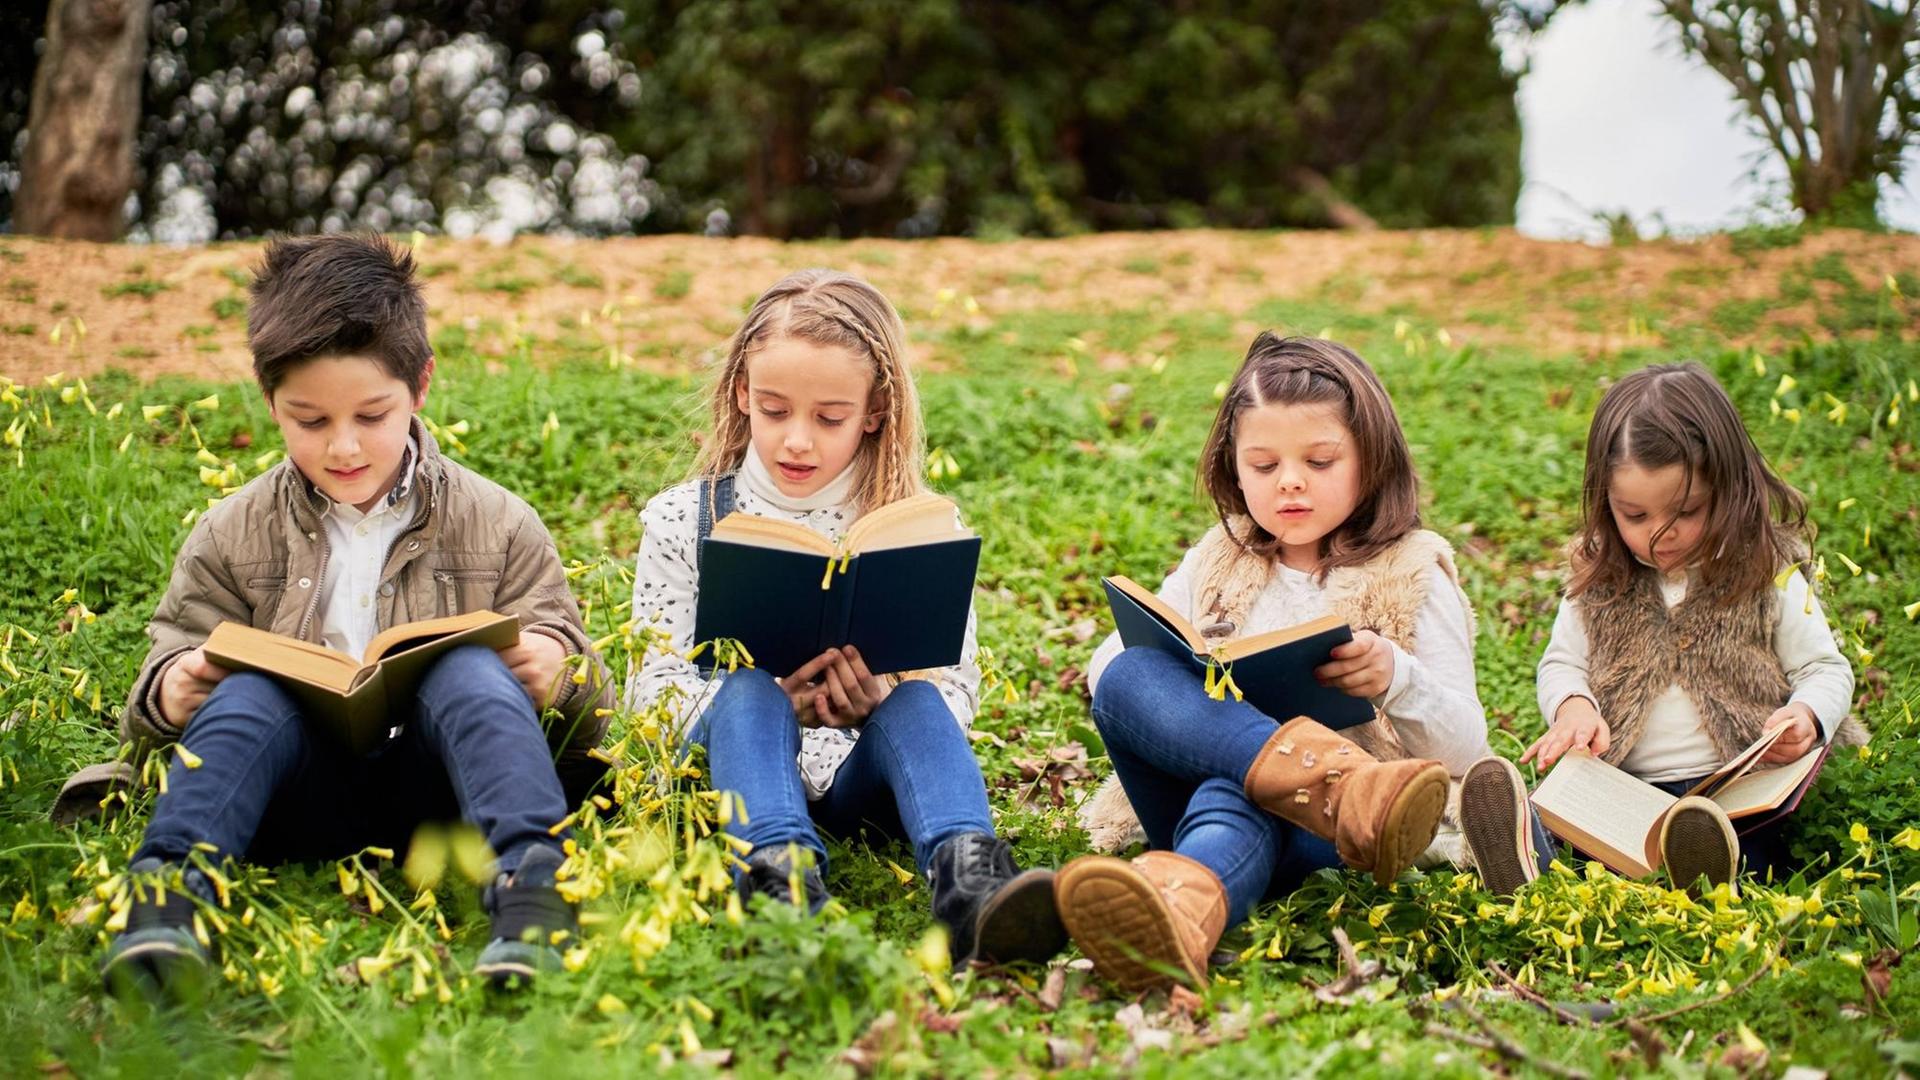 Smart children sitting on green hill in park and reading interesting books while enjoying weekend together Copyright: xDanielxLozanox